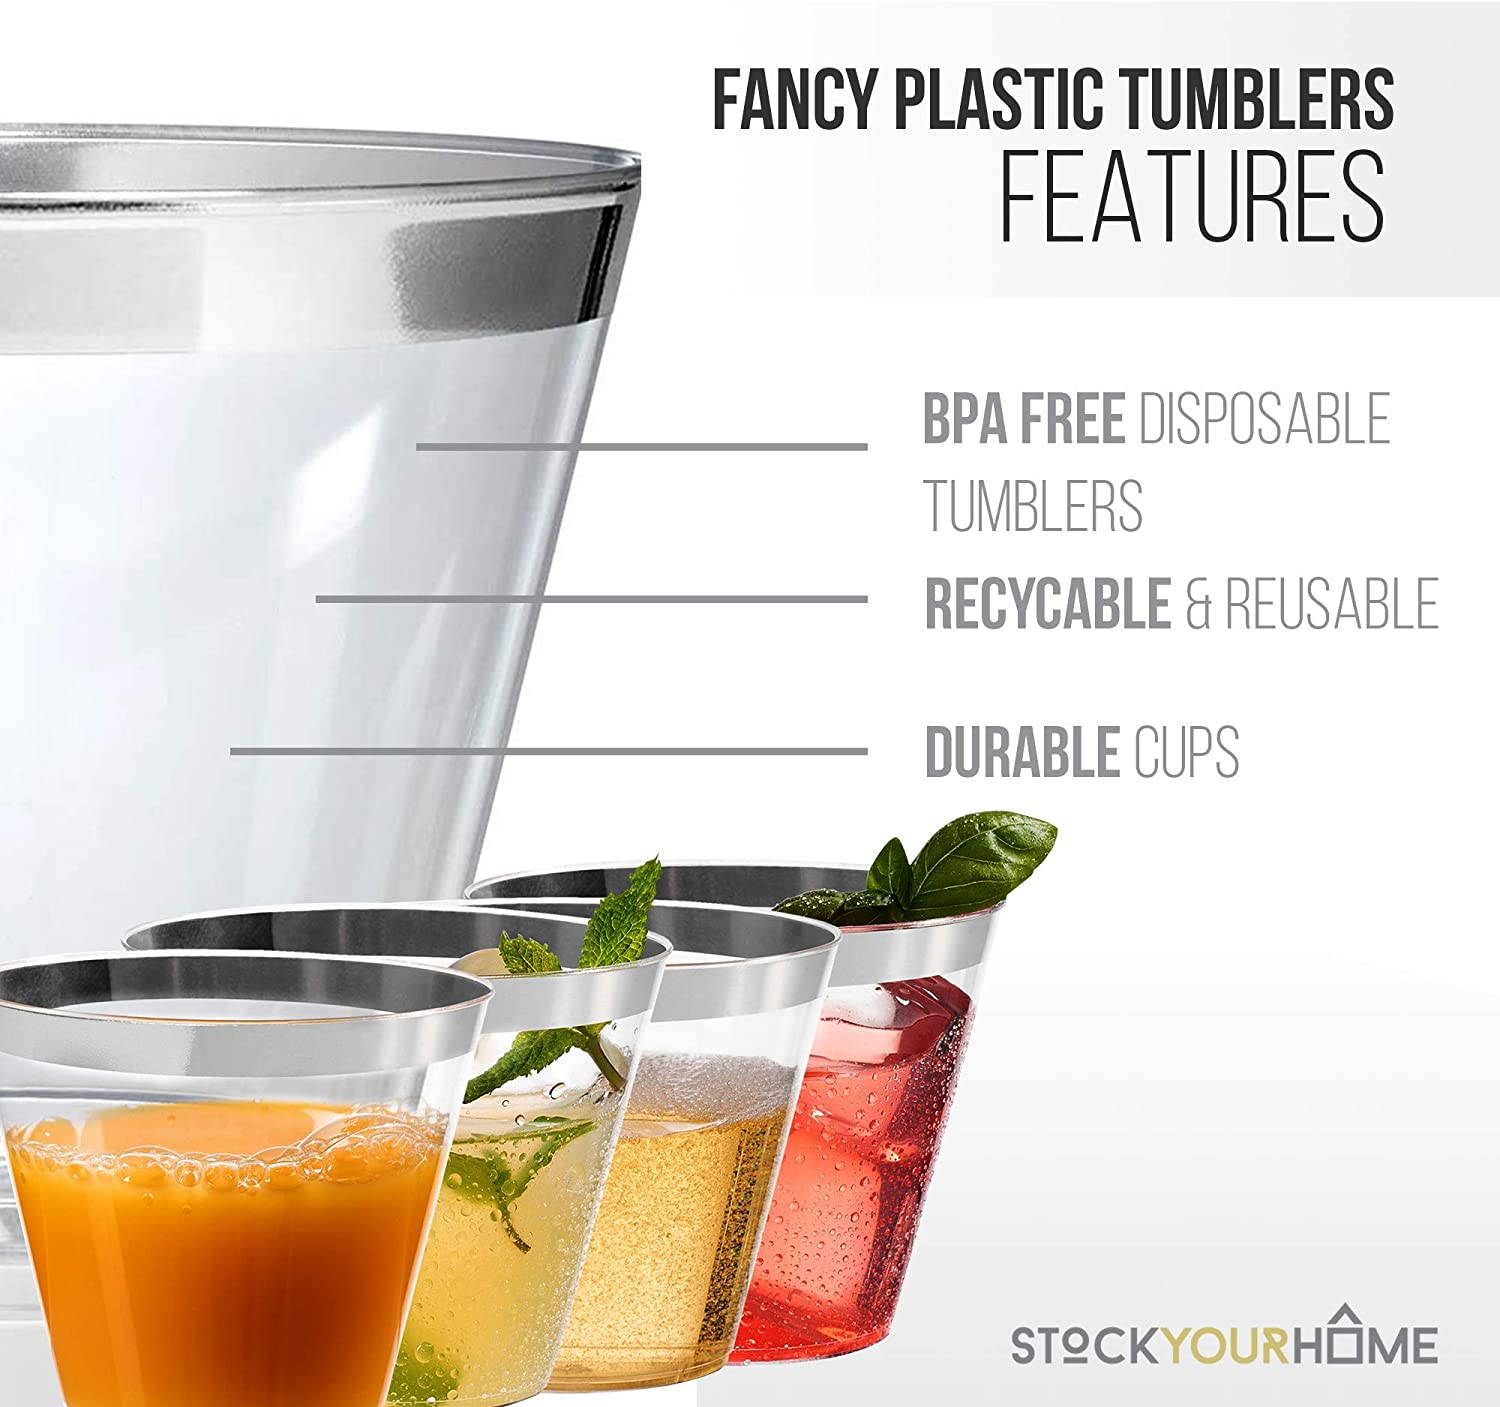 100 Pack Clear Plastic Cups 9oz, Disposable Plastic Cups Tumblers